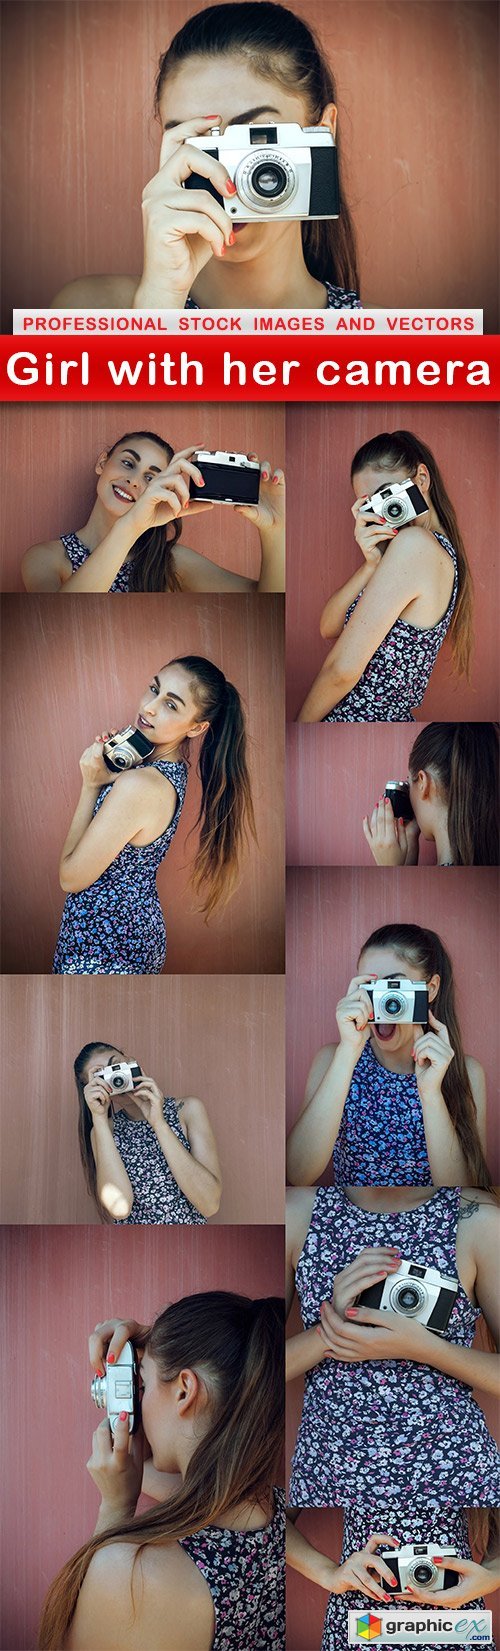 Girl with her camera - 10 UHQ JPEG